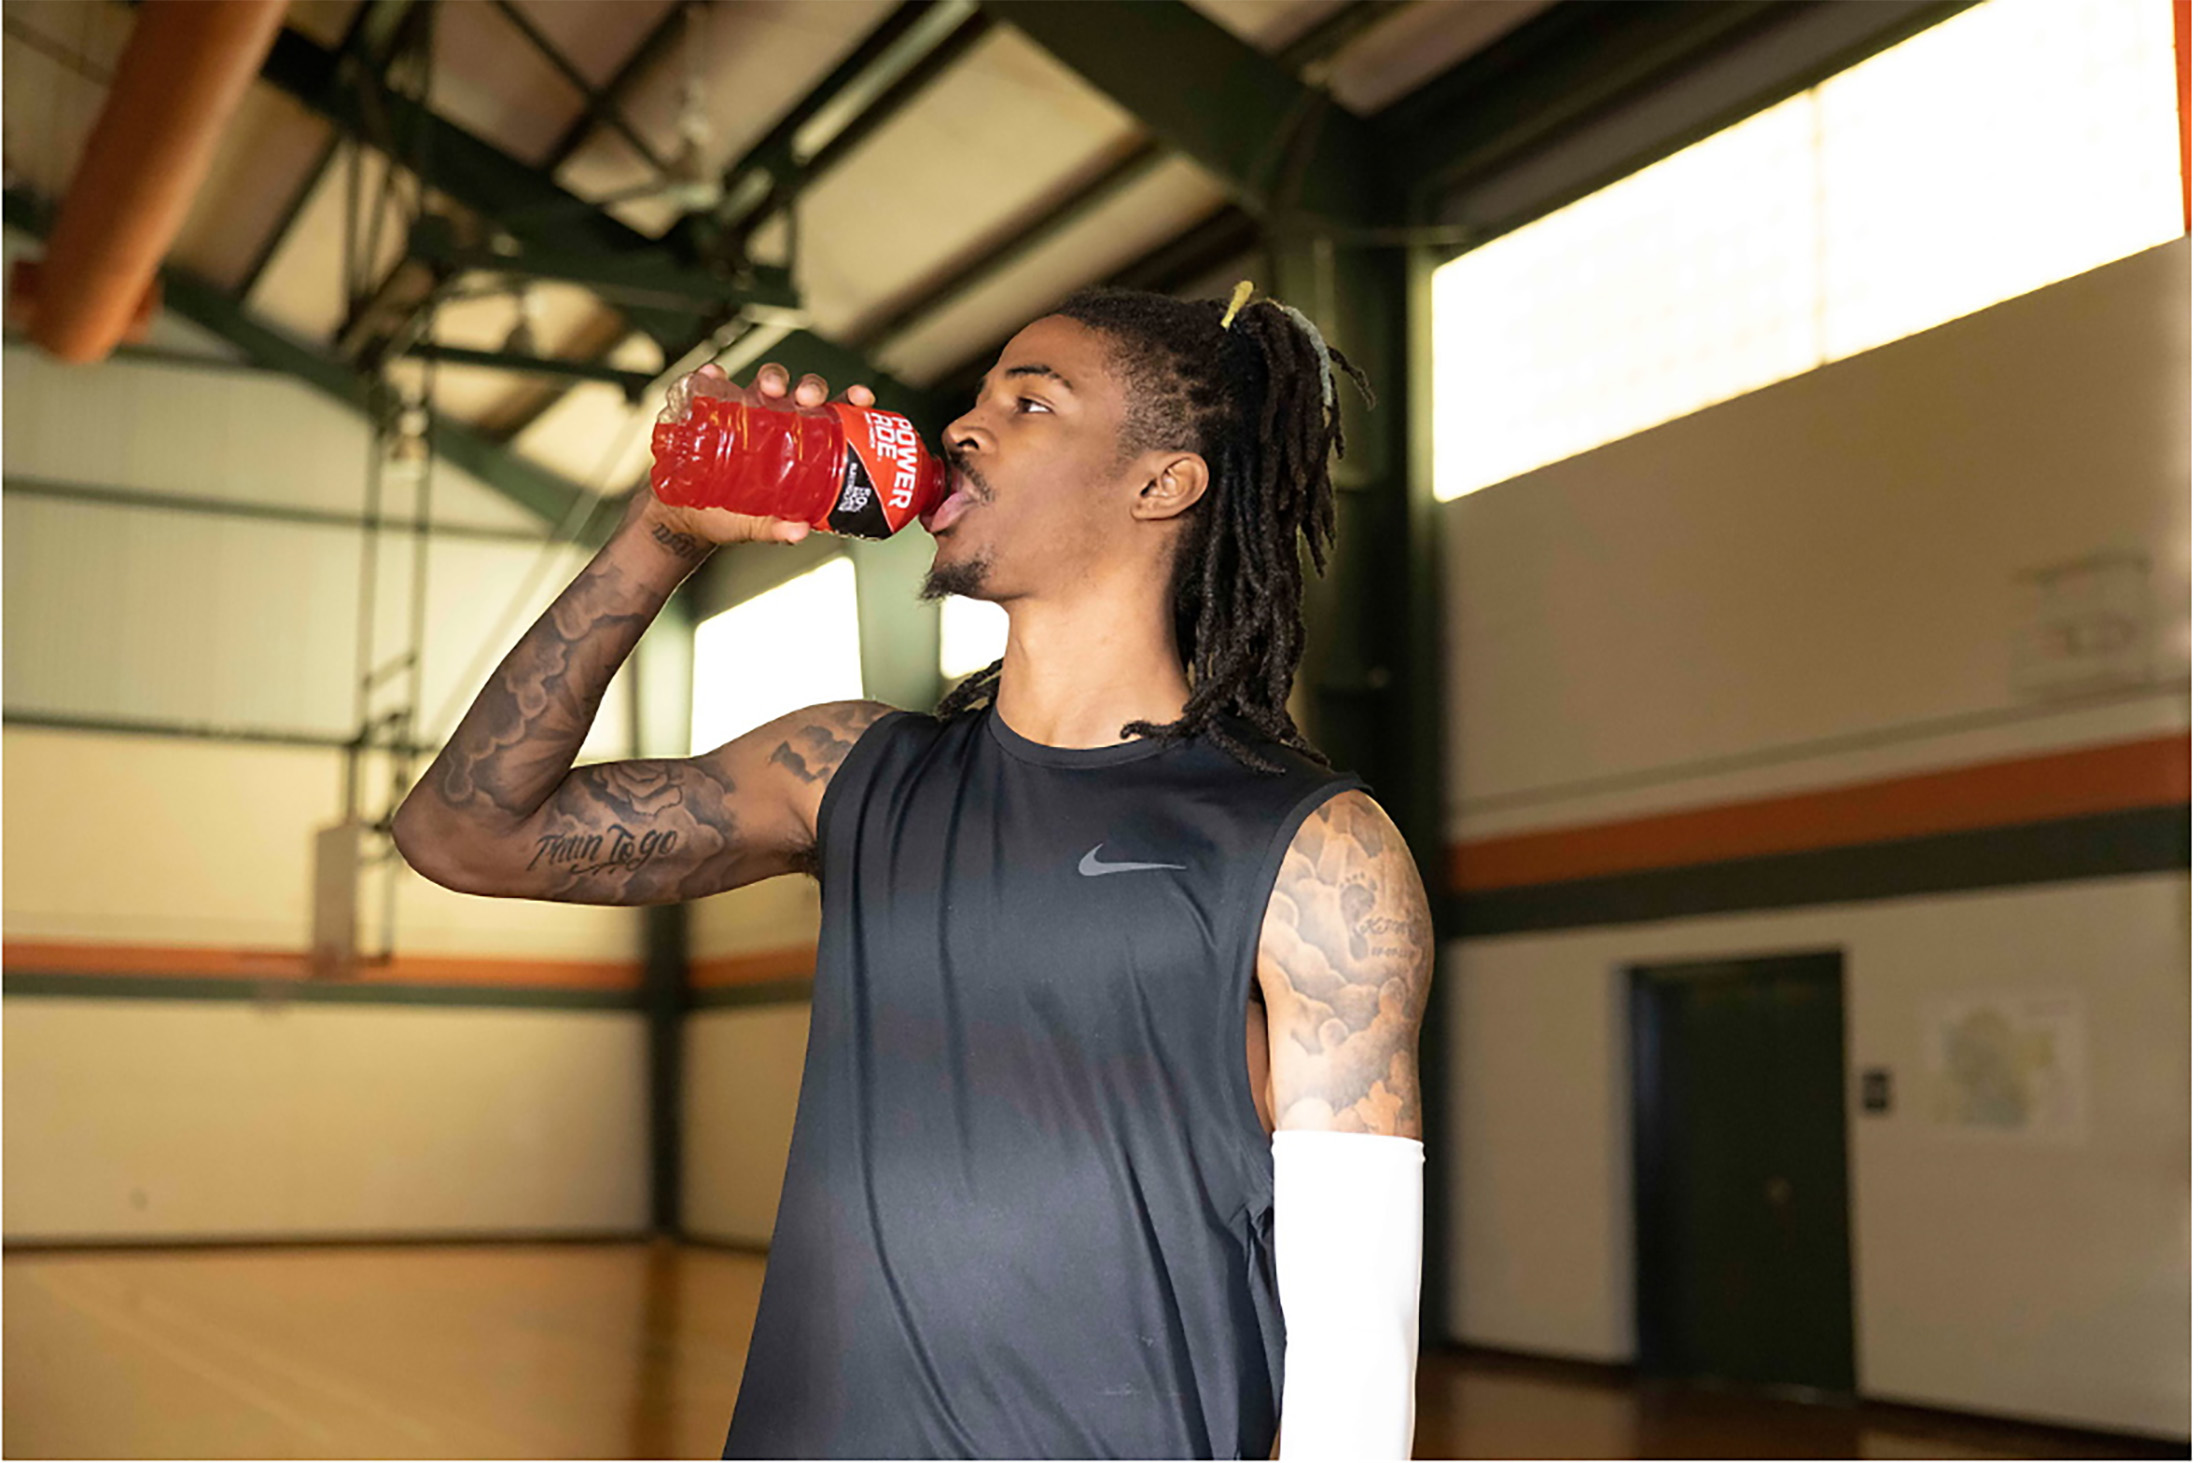 Powerade Signs Ja Morant to Multiyear Deal to Be Its New Face